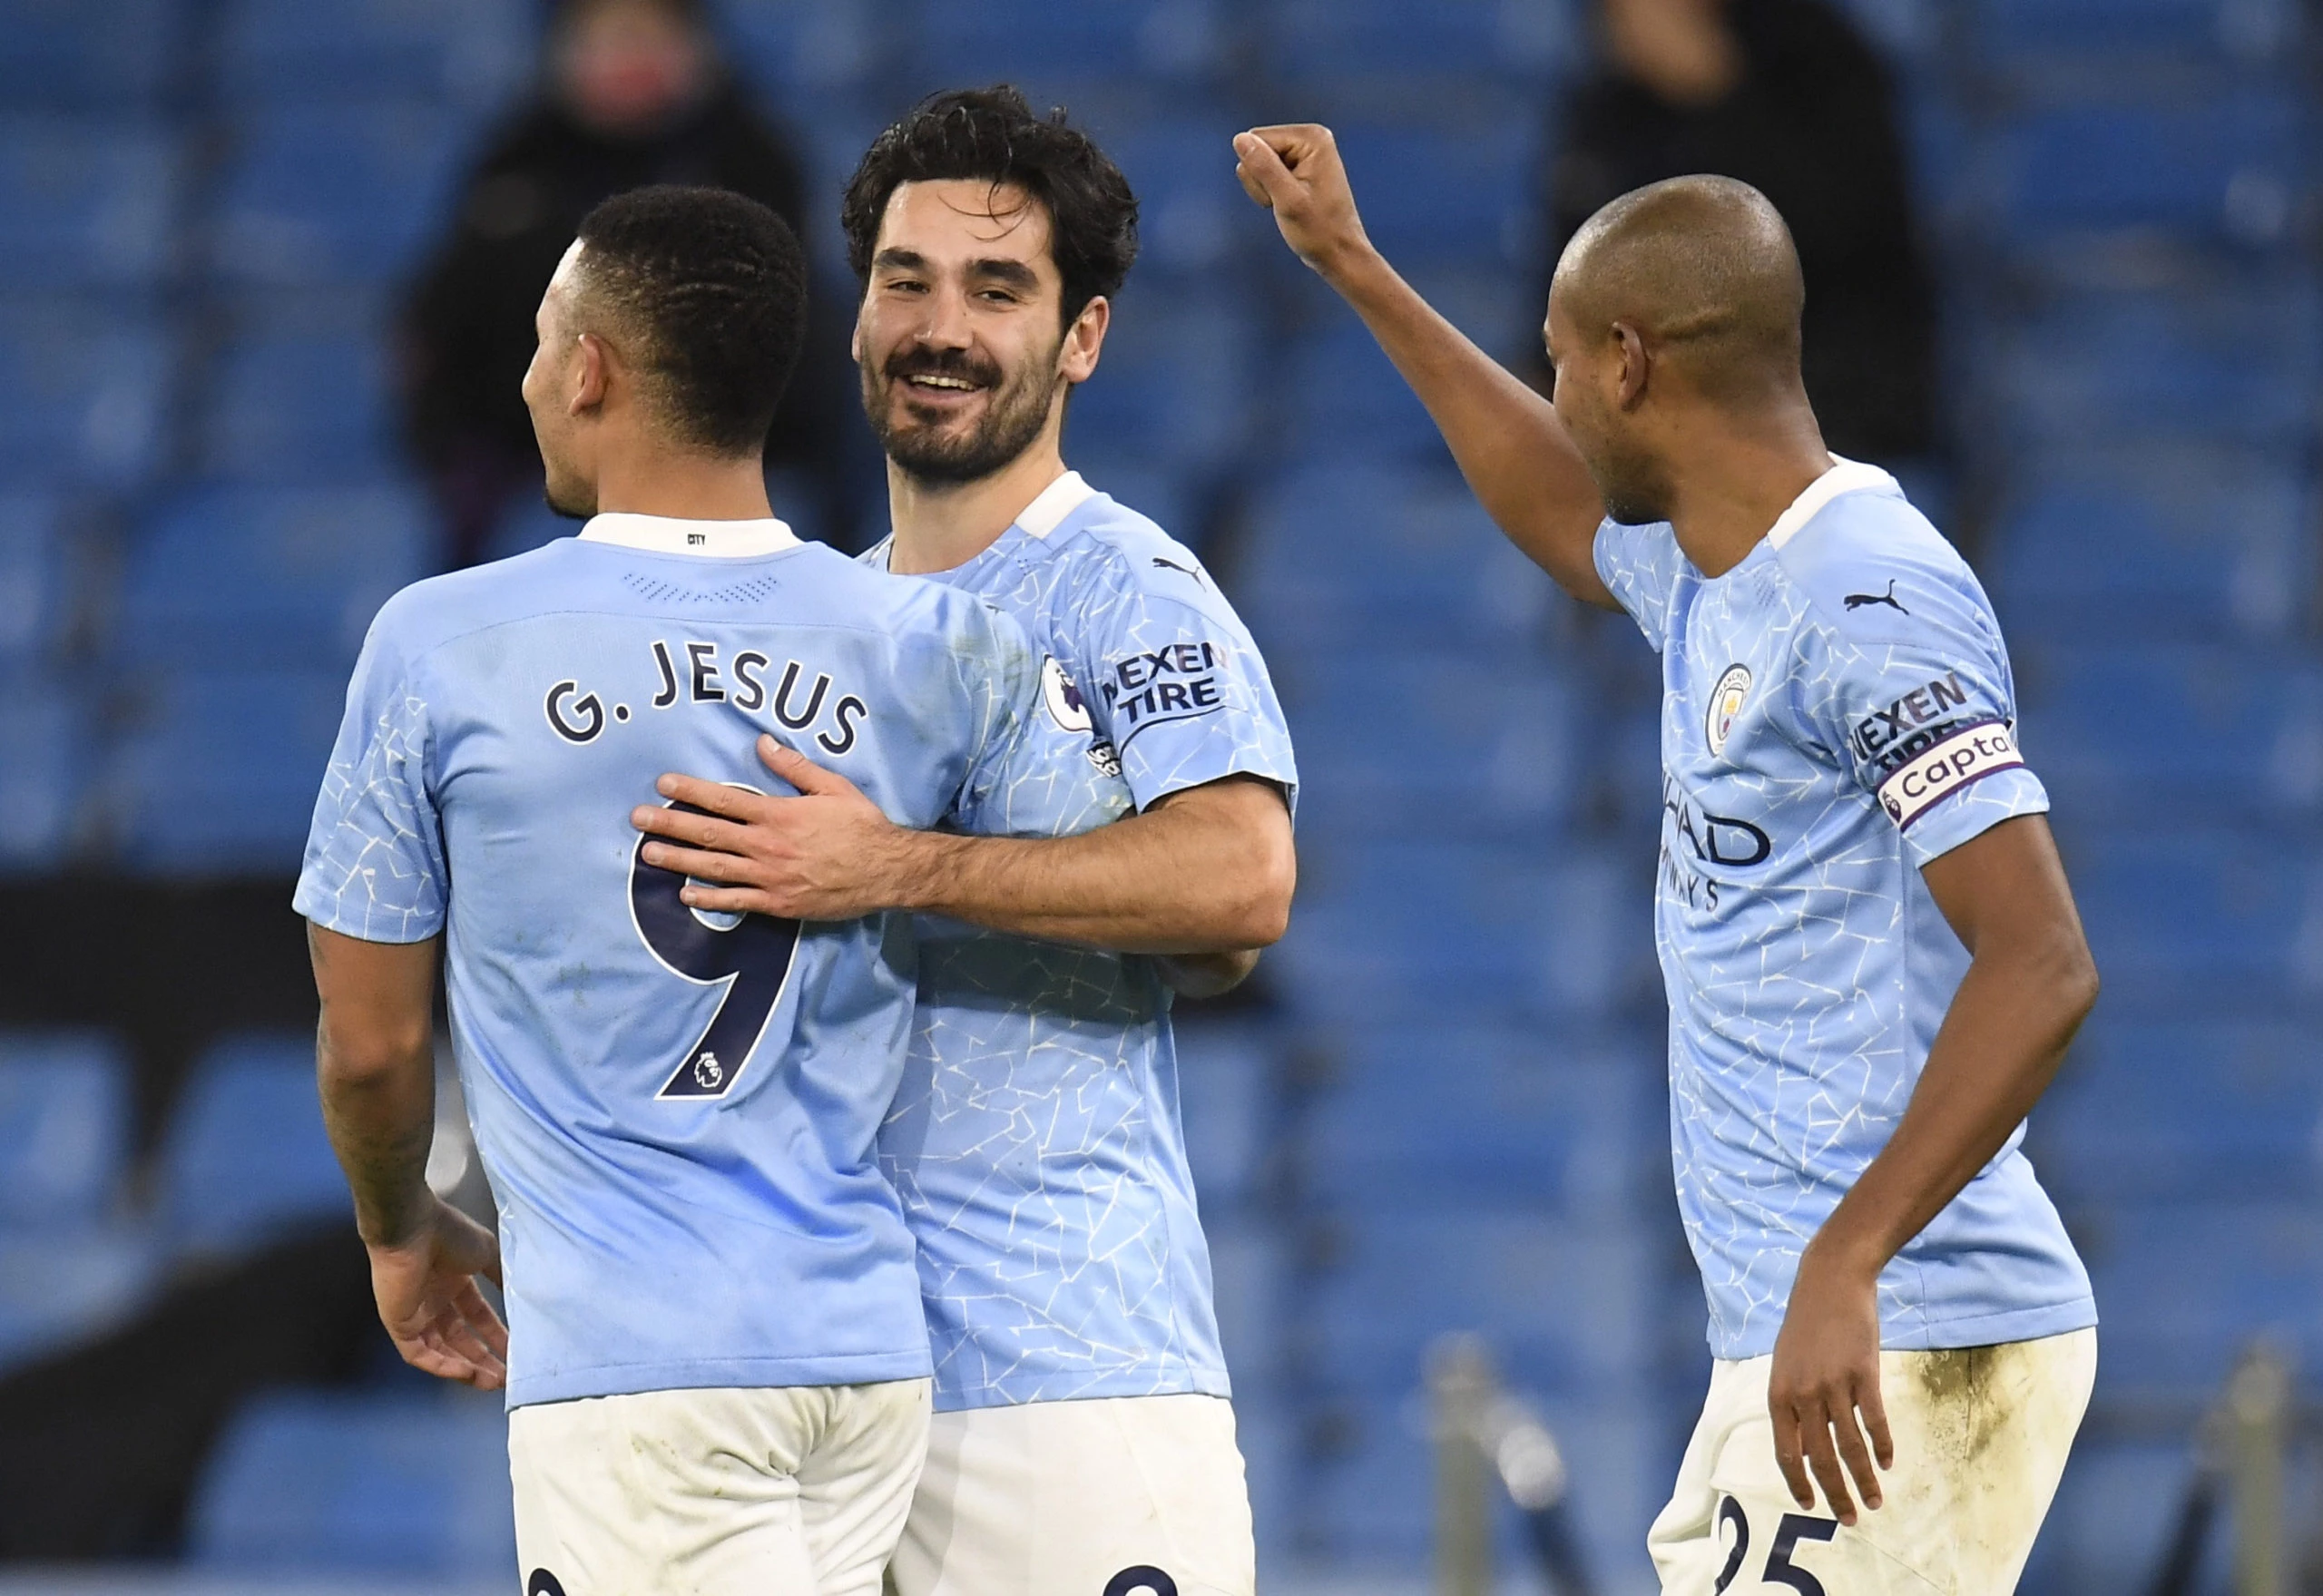 How Jesus' return impacted Gündogan's FPL output in rotated Man City side